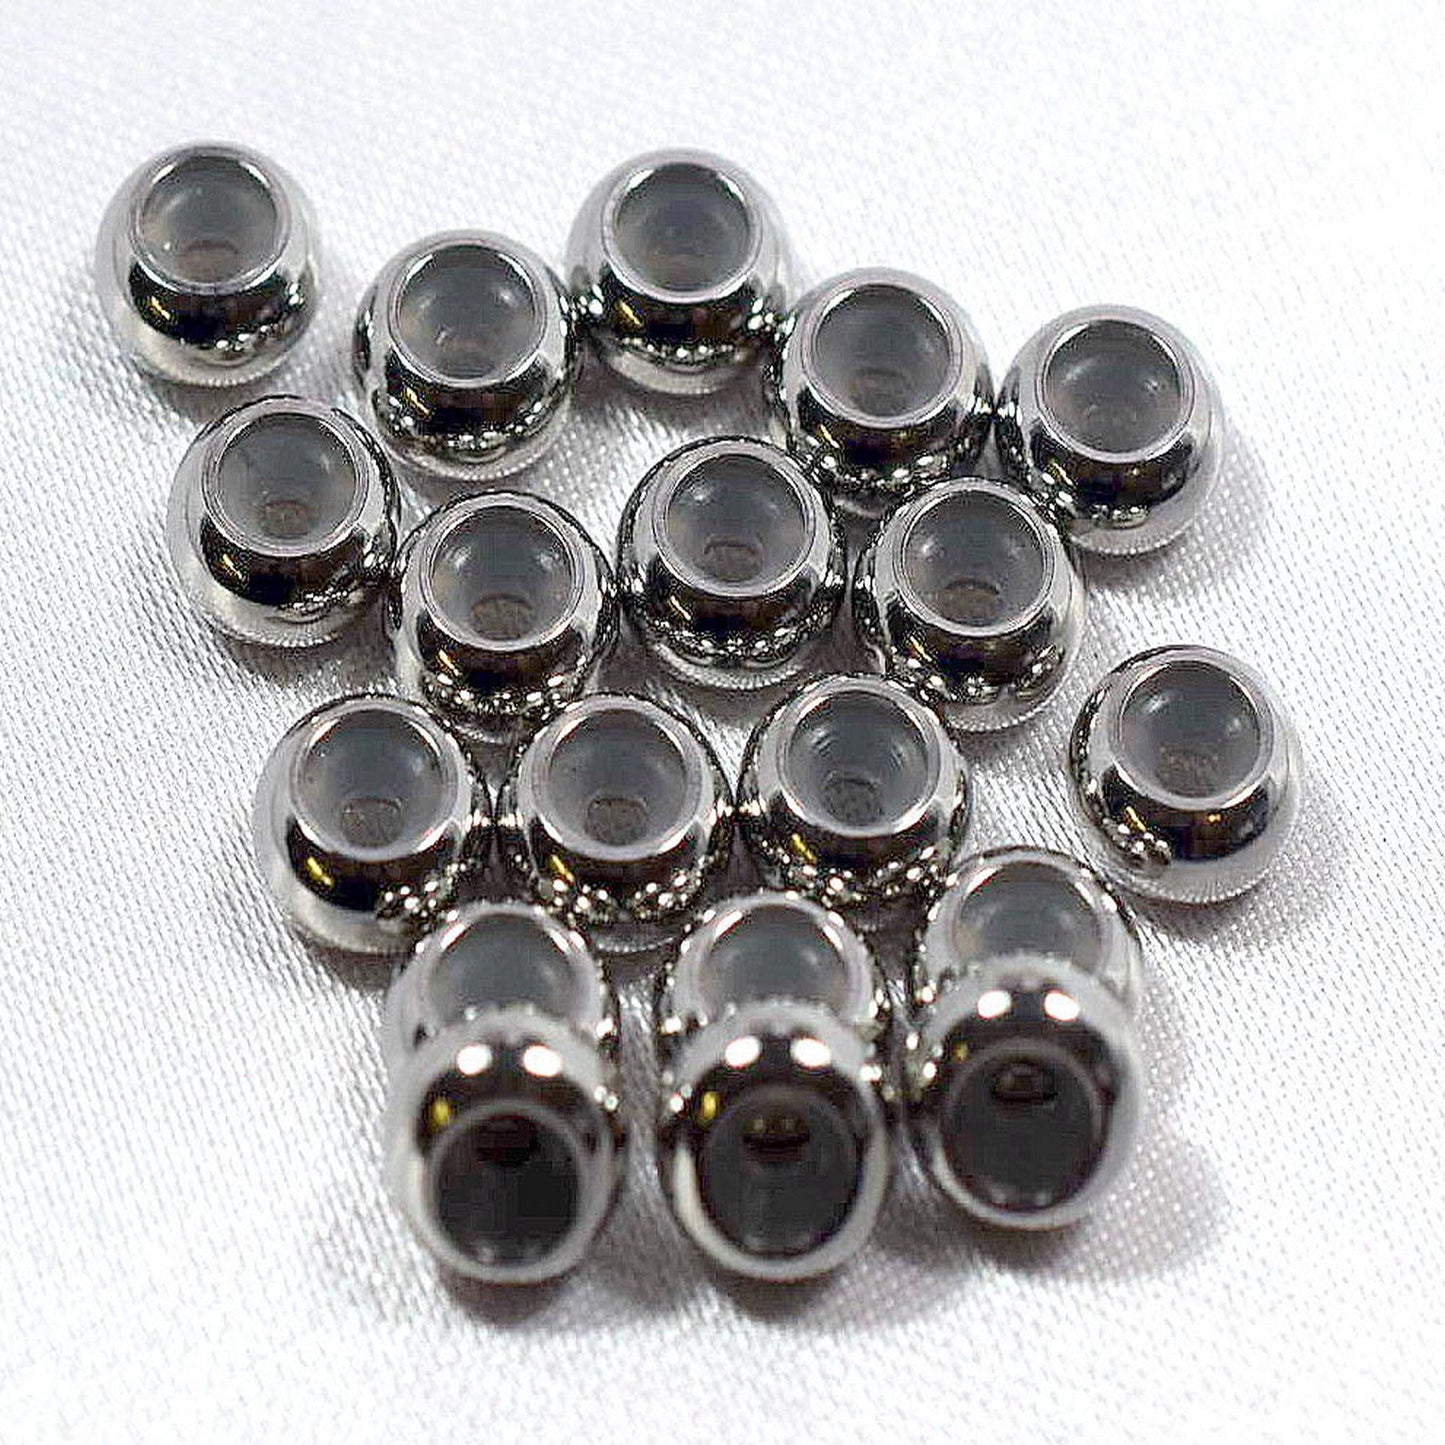 Stainless Steel Roundel Adjustable Lock Beads Size 7x3mm with Clear Rubber inside,Finding Supply For Jewelry Making fit 2 Lines 1.5mm